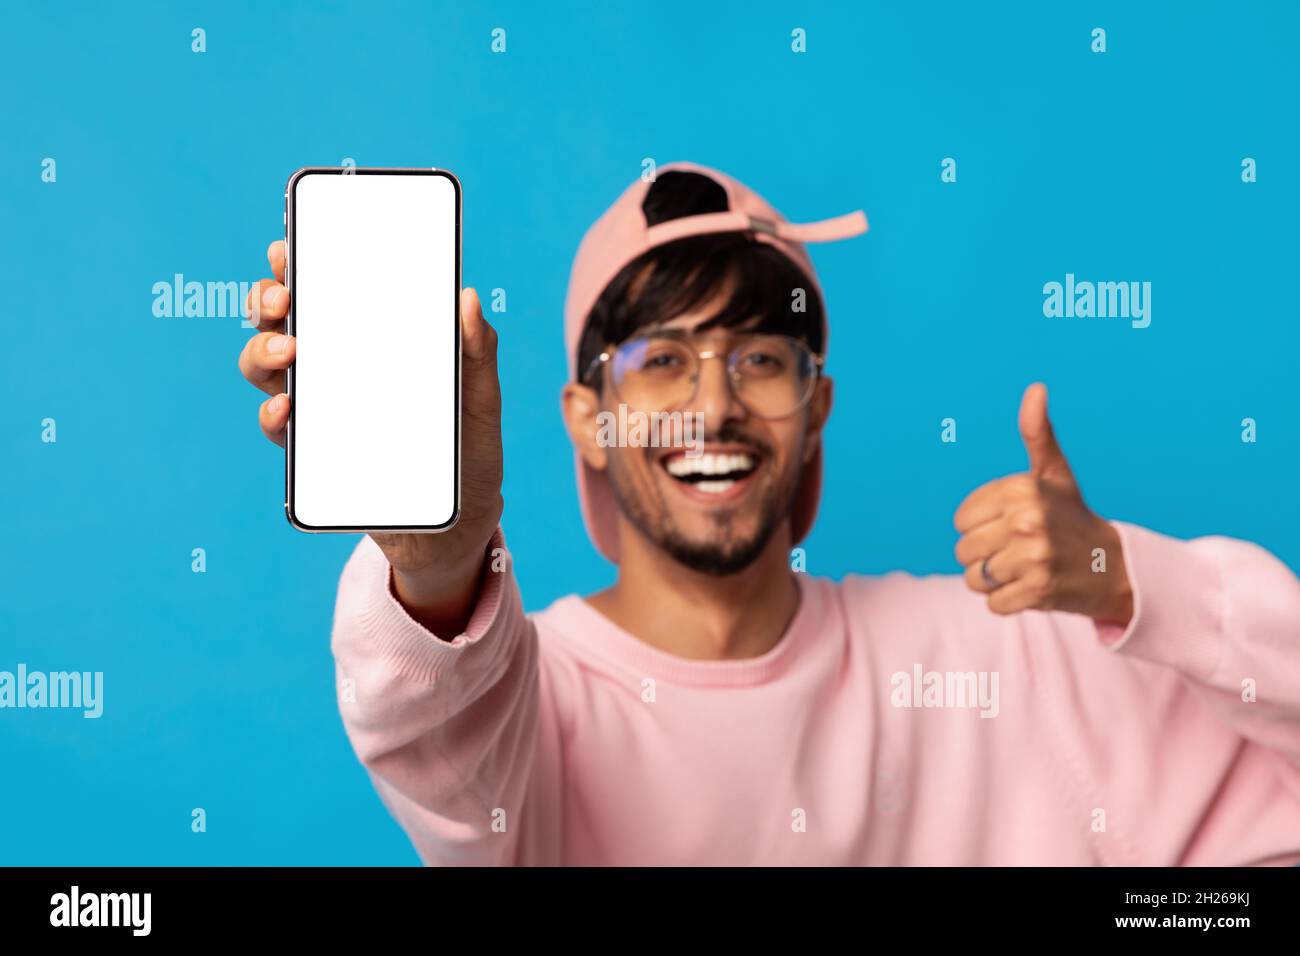 Smartphone with blank screen in young arabic man hand Stock Photo